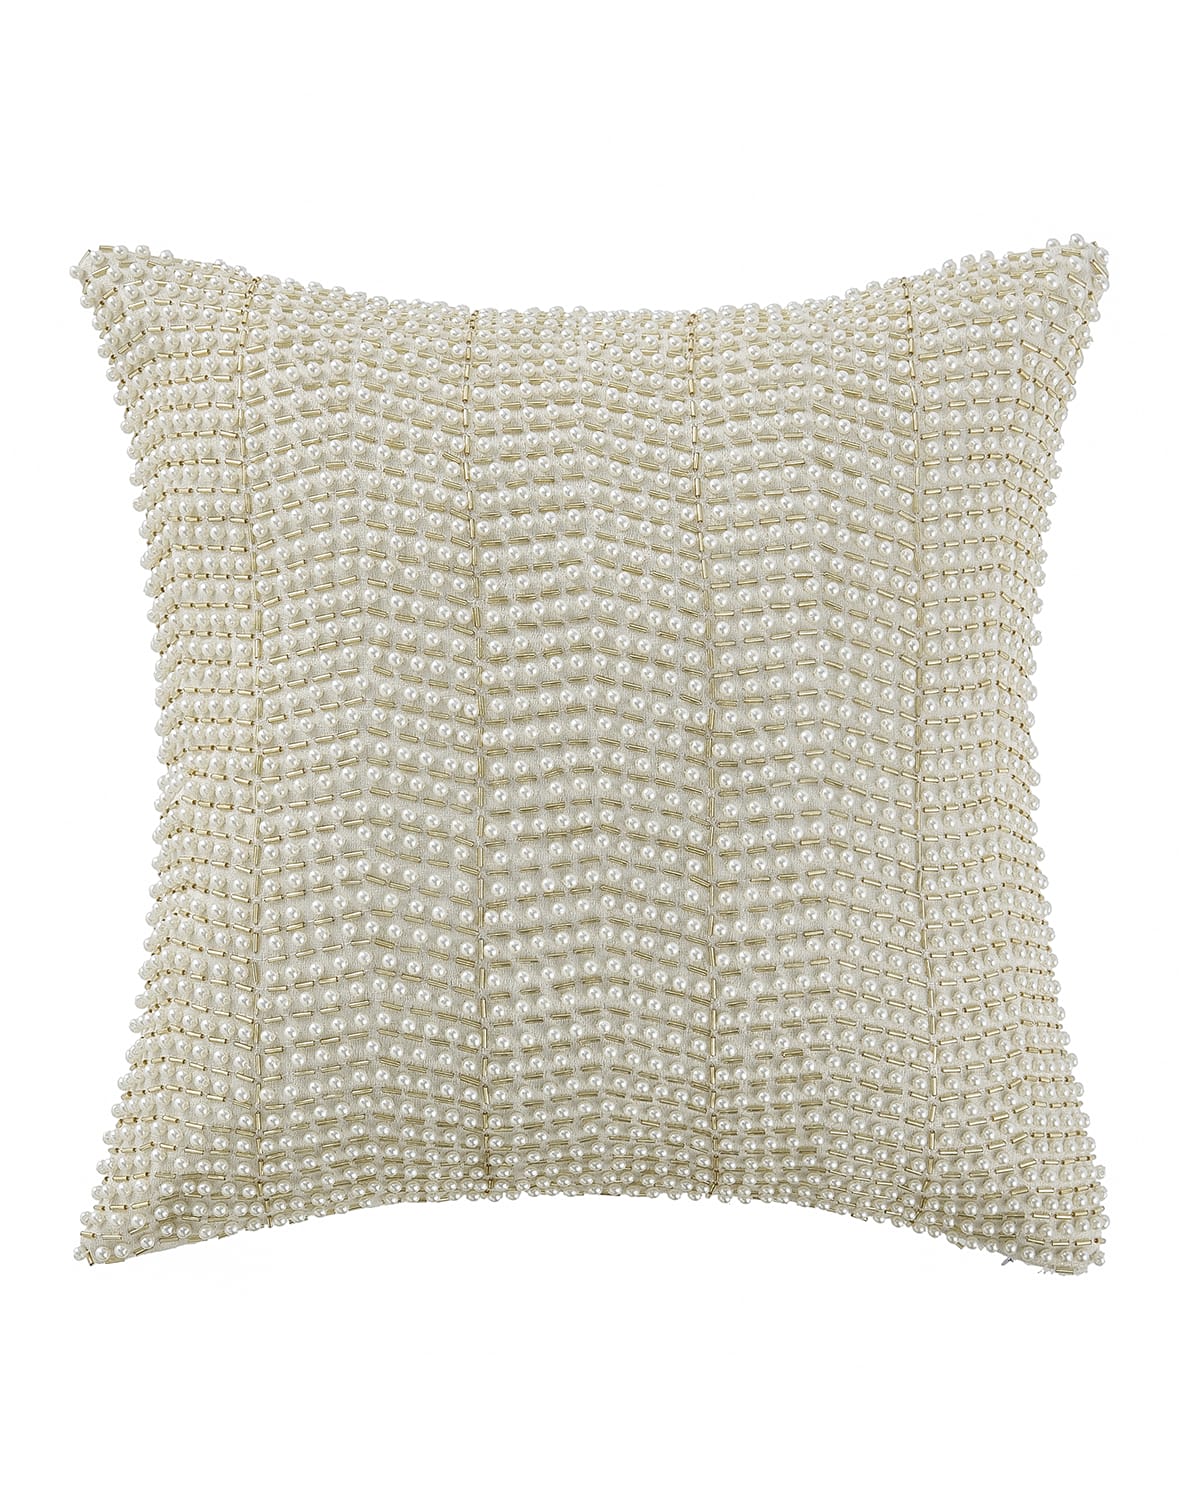 Image Waterford Britt Beaded Pillow, 14"Sq.